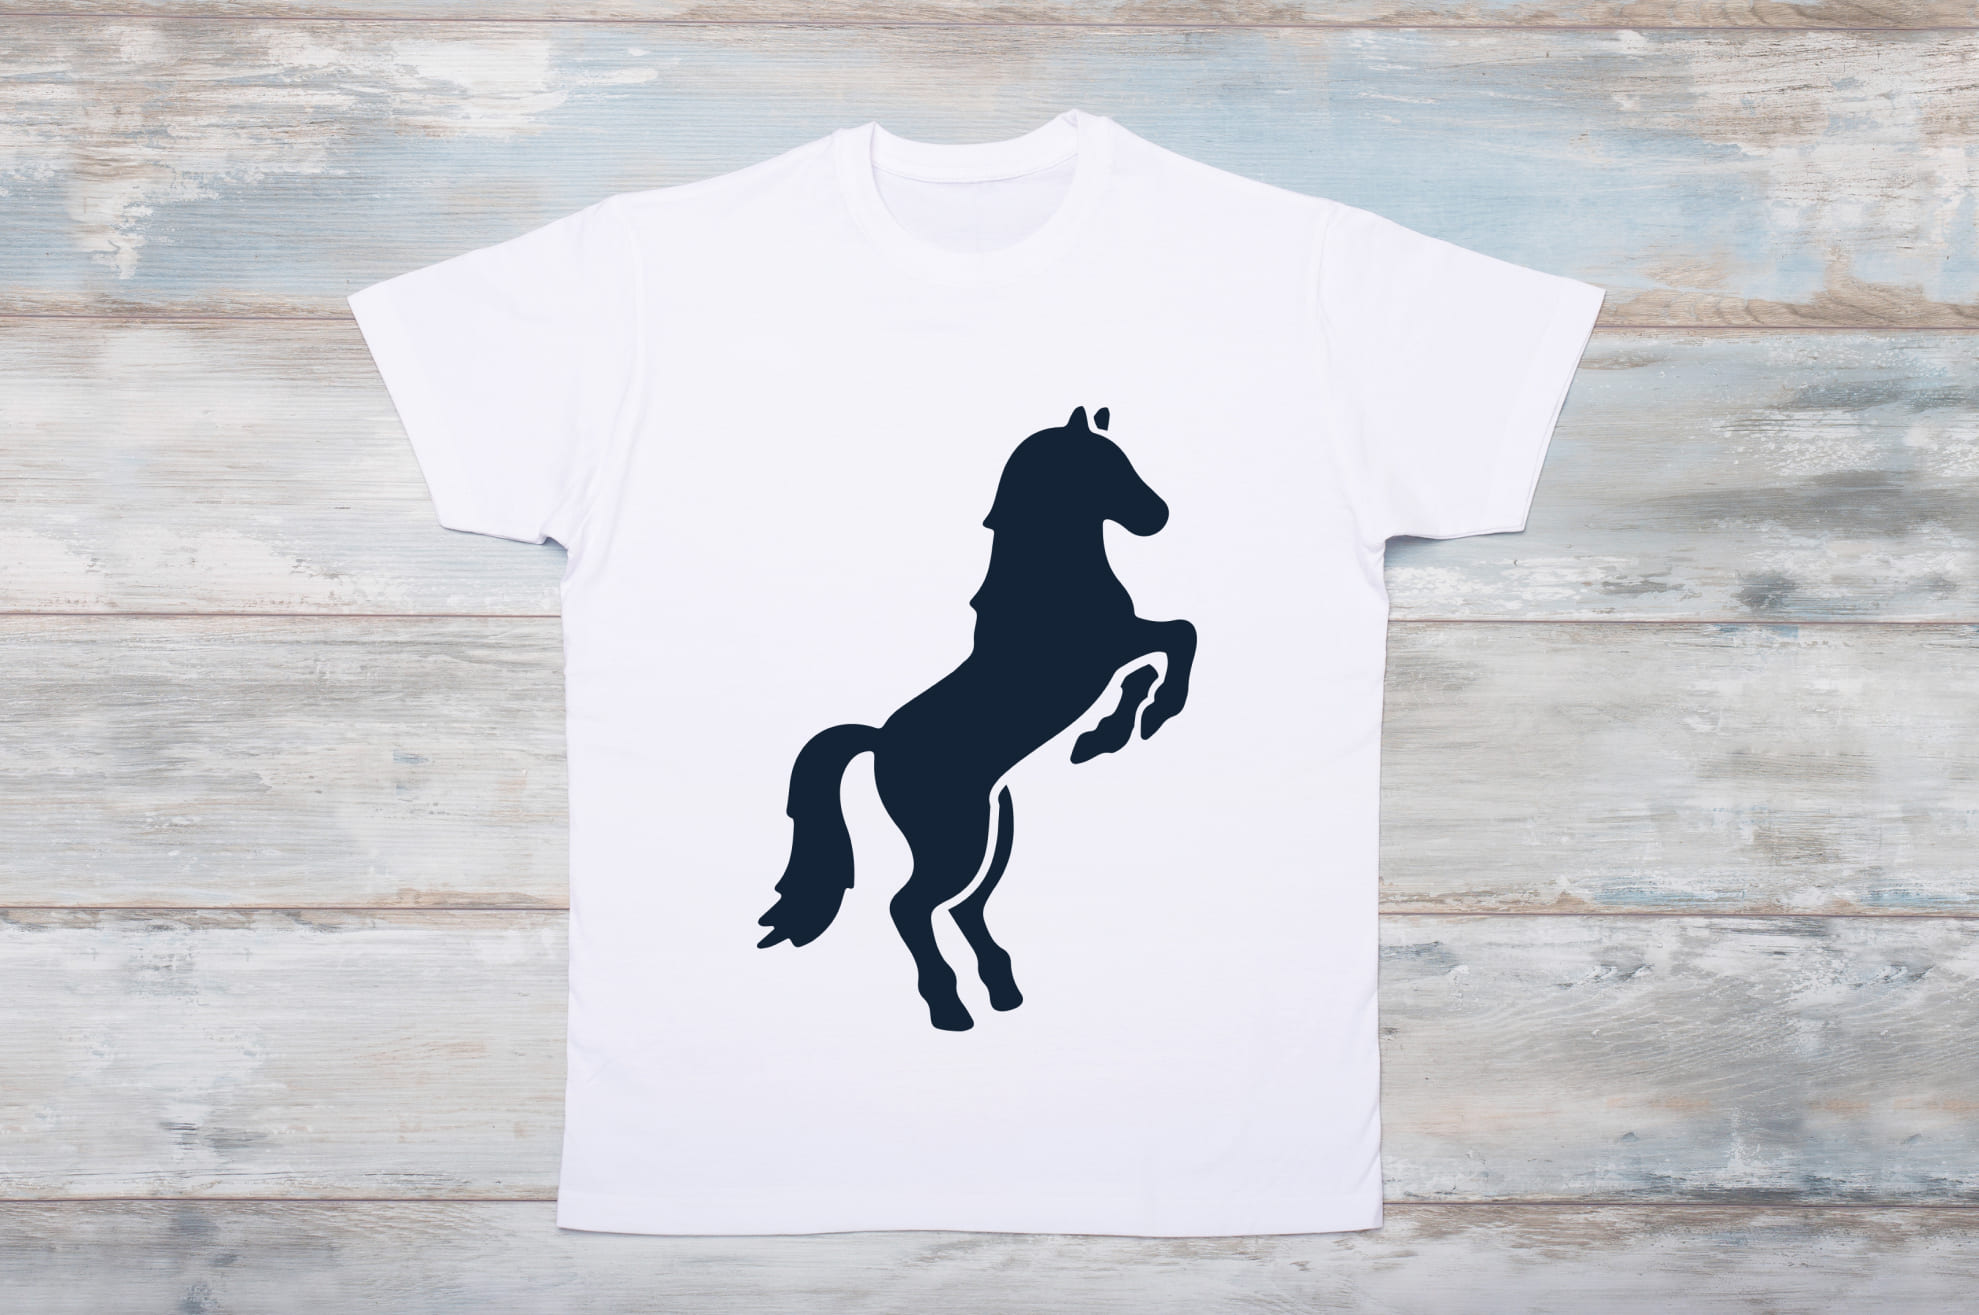 White t-shirt with a black silhouette of an energetic horse on the wooden background.